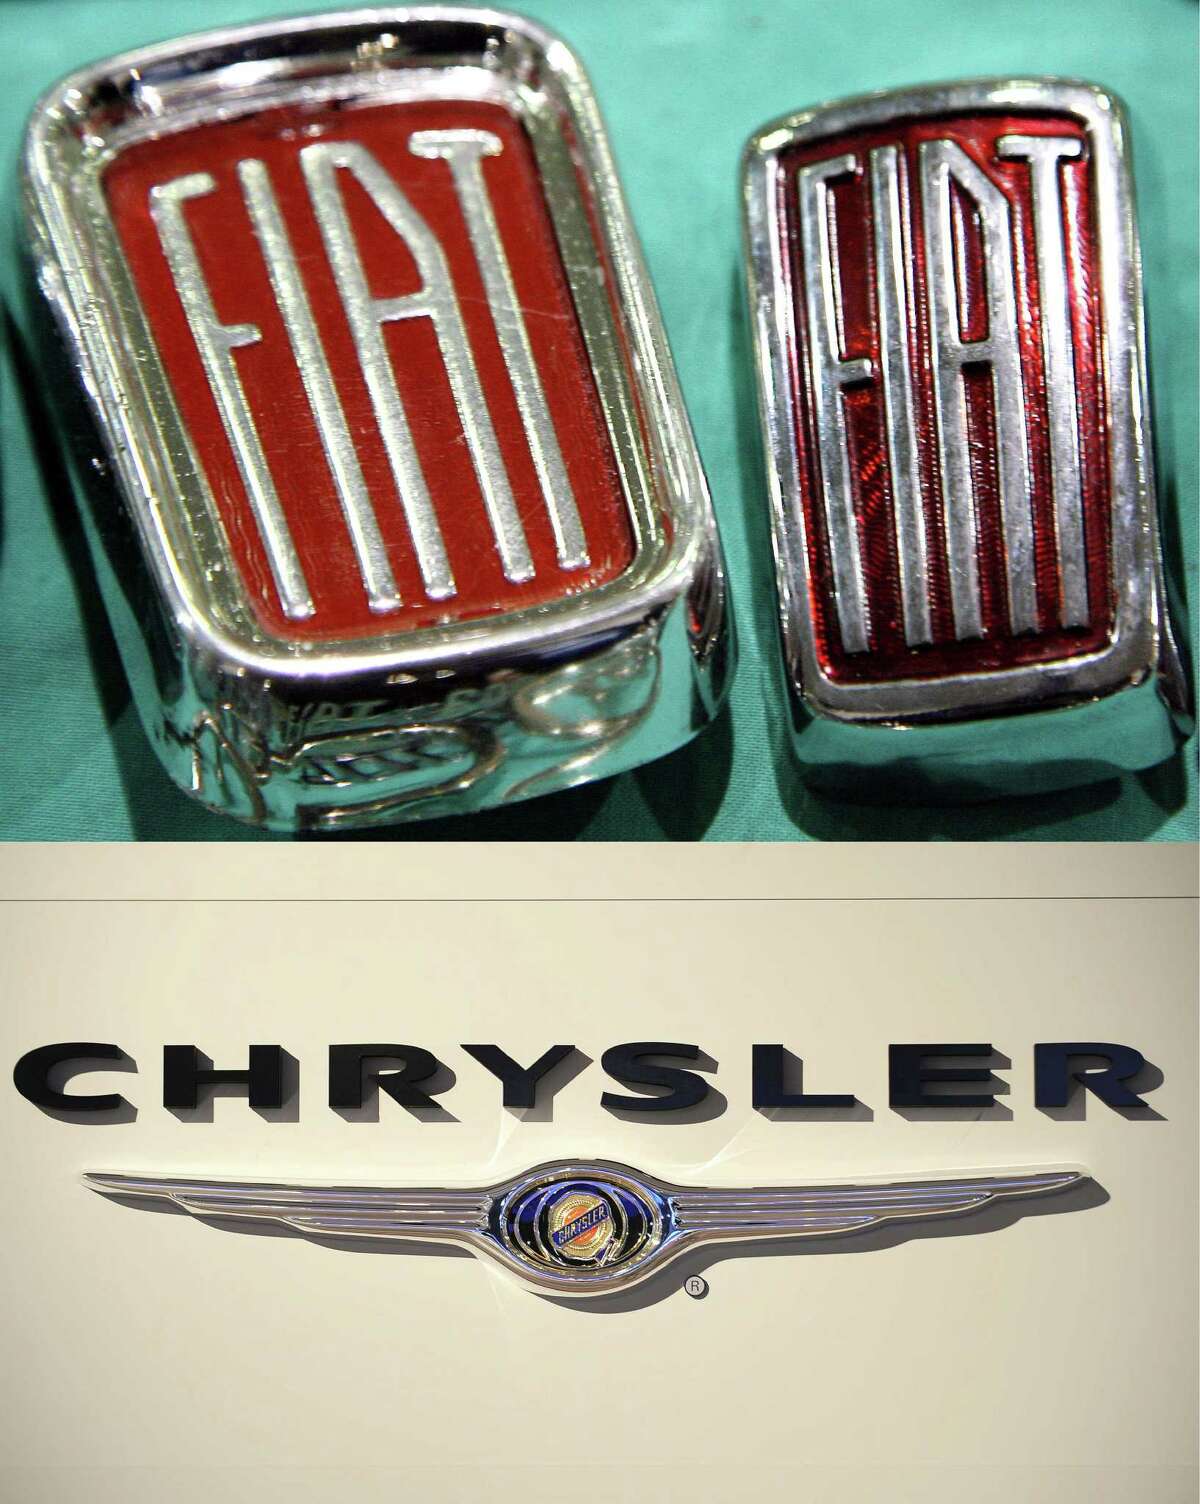 Italian automaker Fiat and America's Chrysler will be even closer after an agreement announced Wednesday.